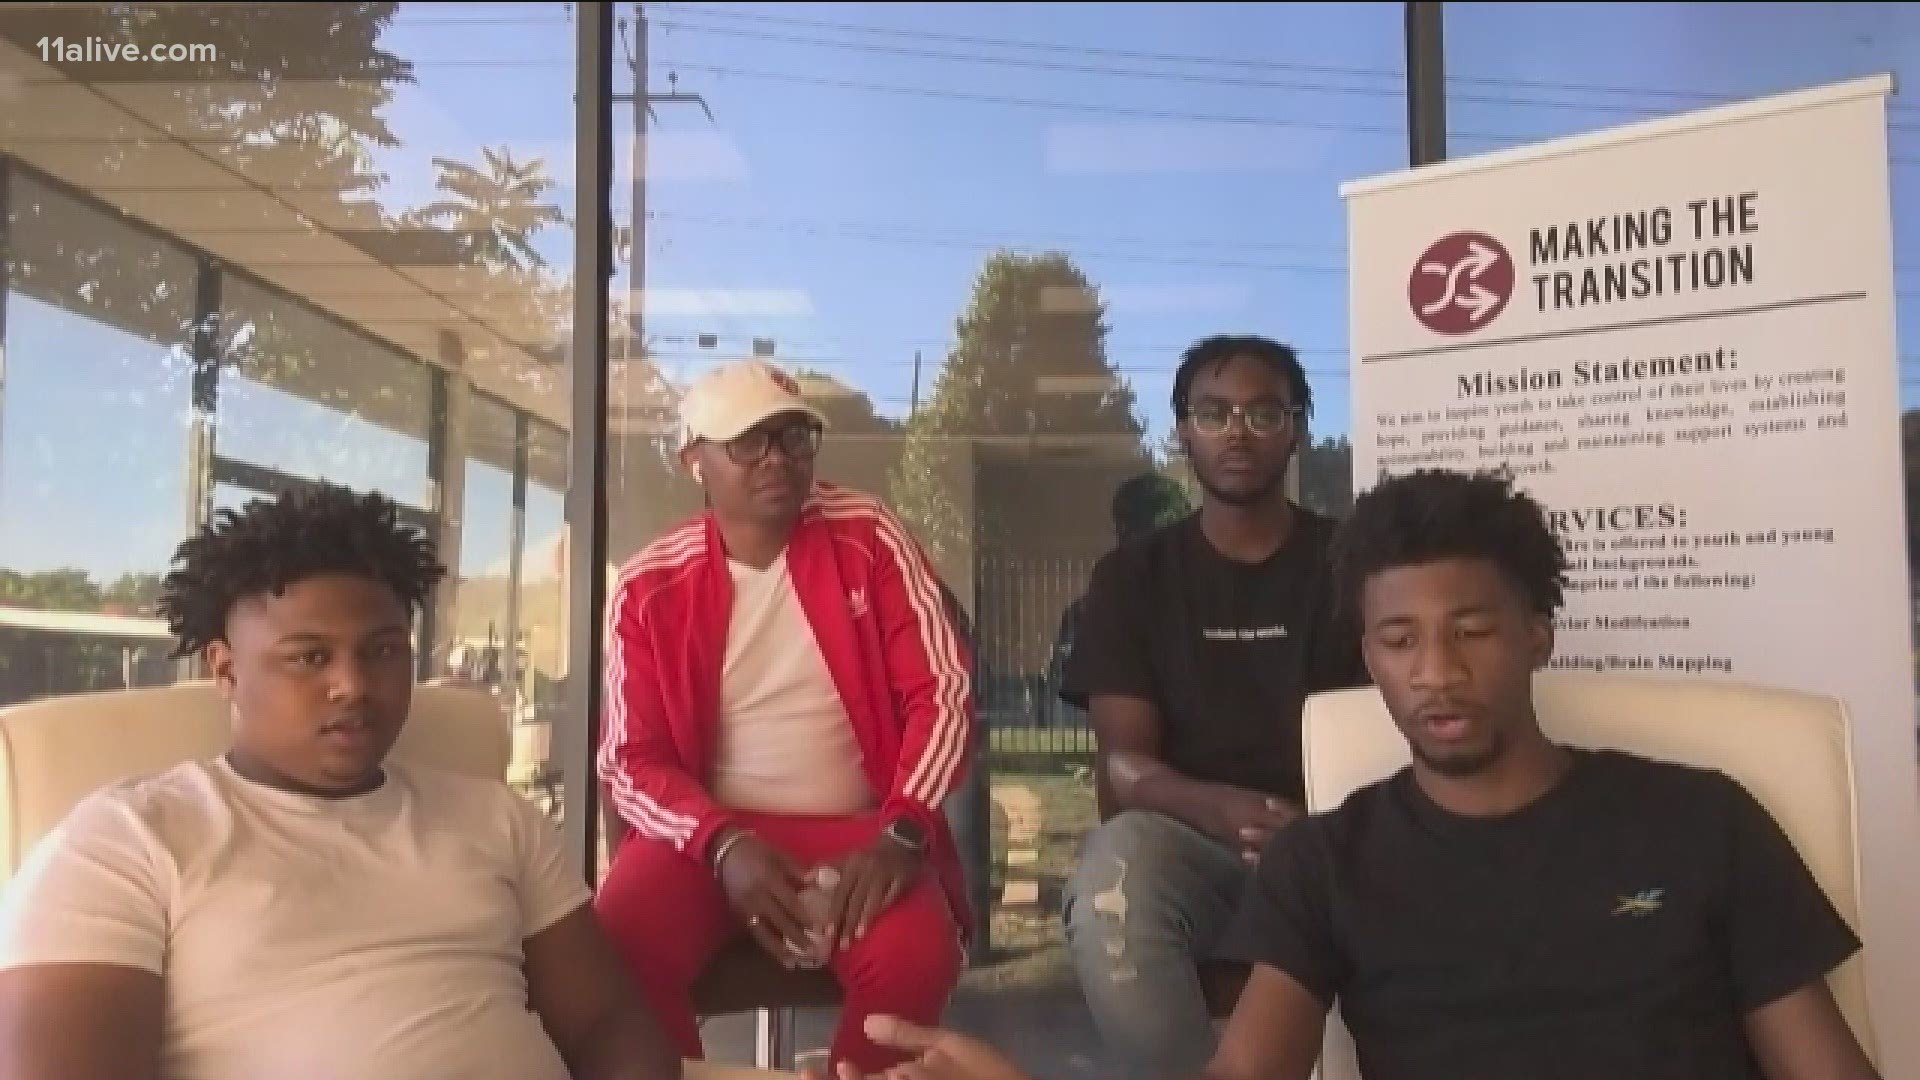 Four young Black men say the problems are not new and they want more resources to help break the cycle.